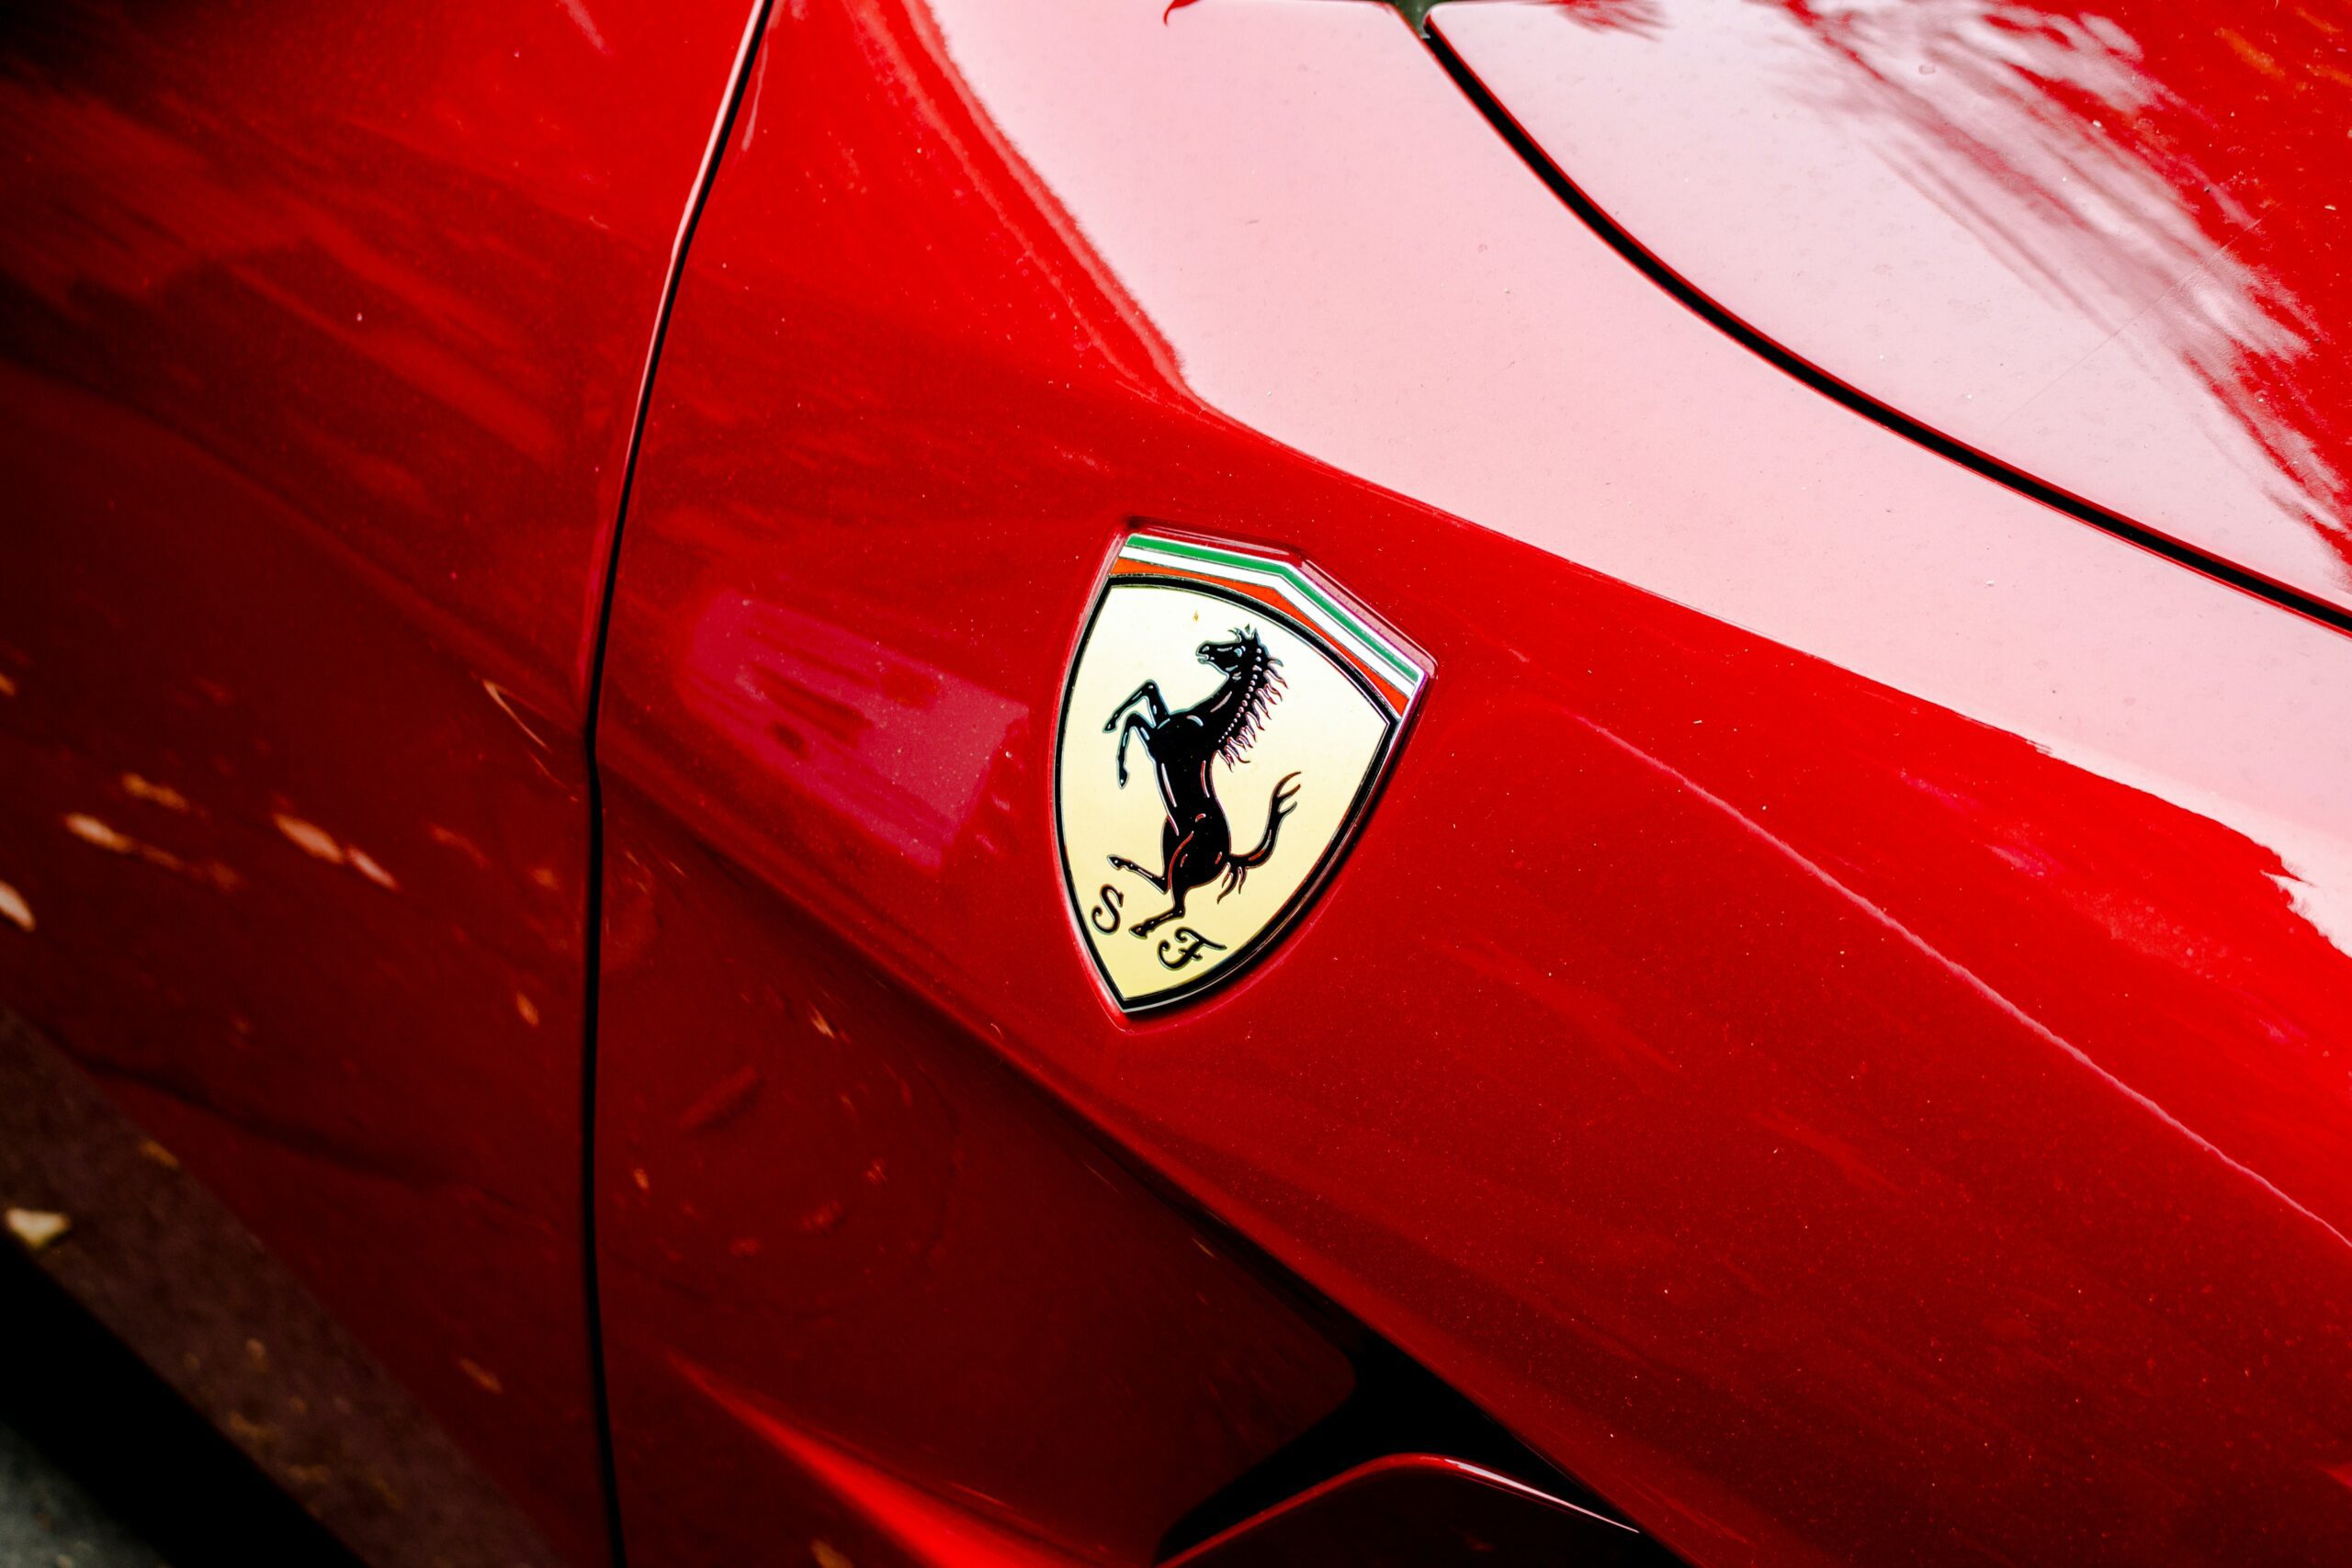 Ferrari Dino coming in 2023; 488 replacement in 2019 - The Supercar Blog